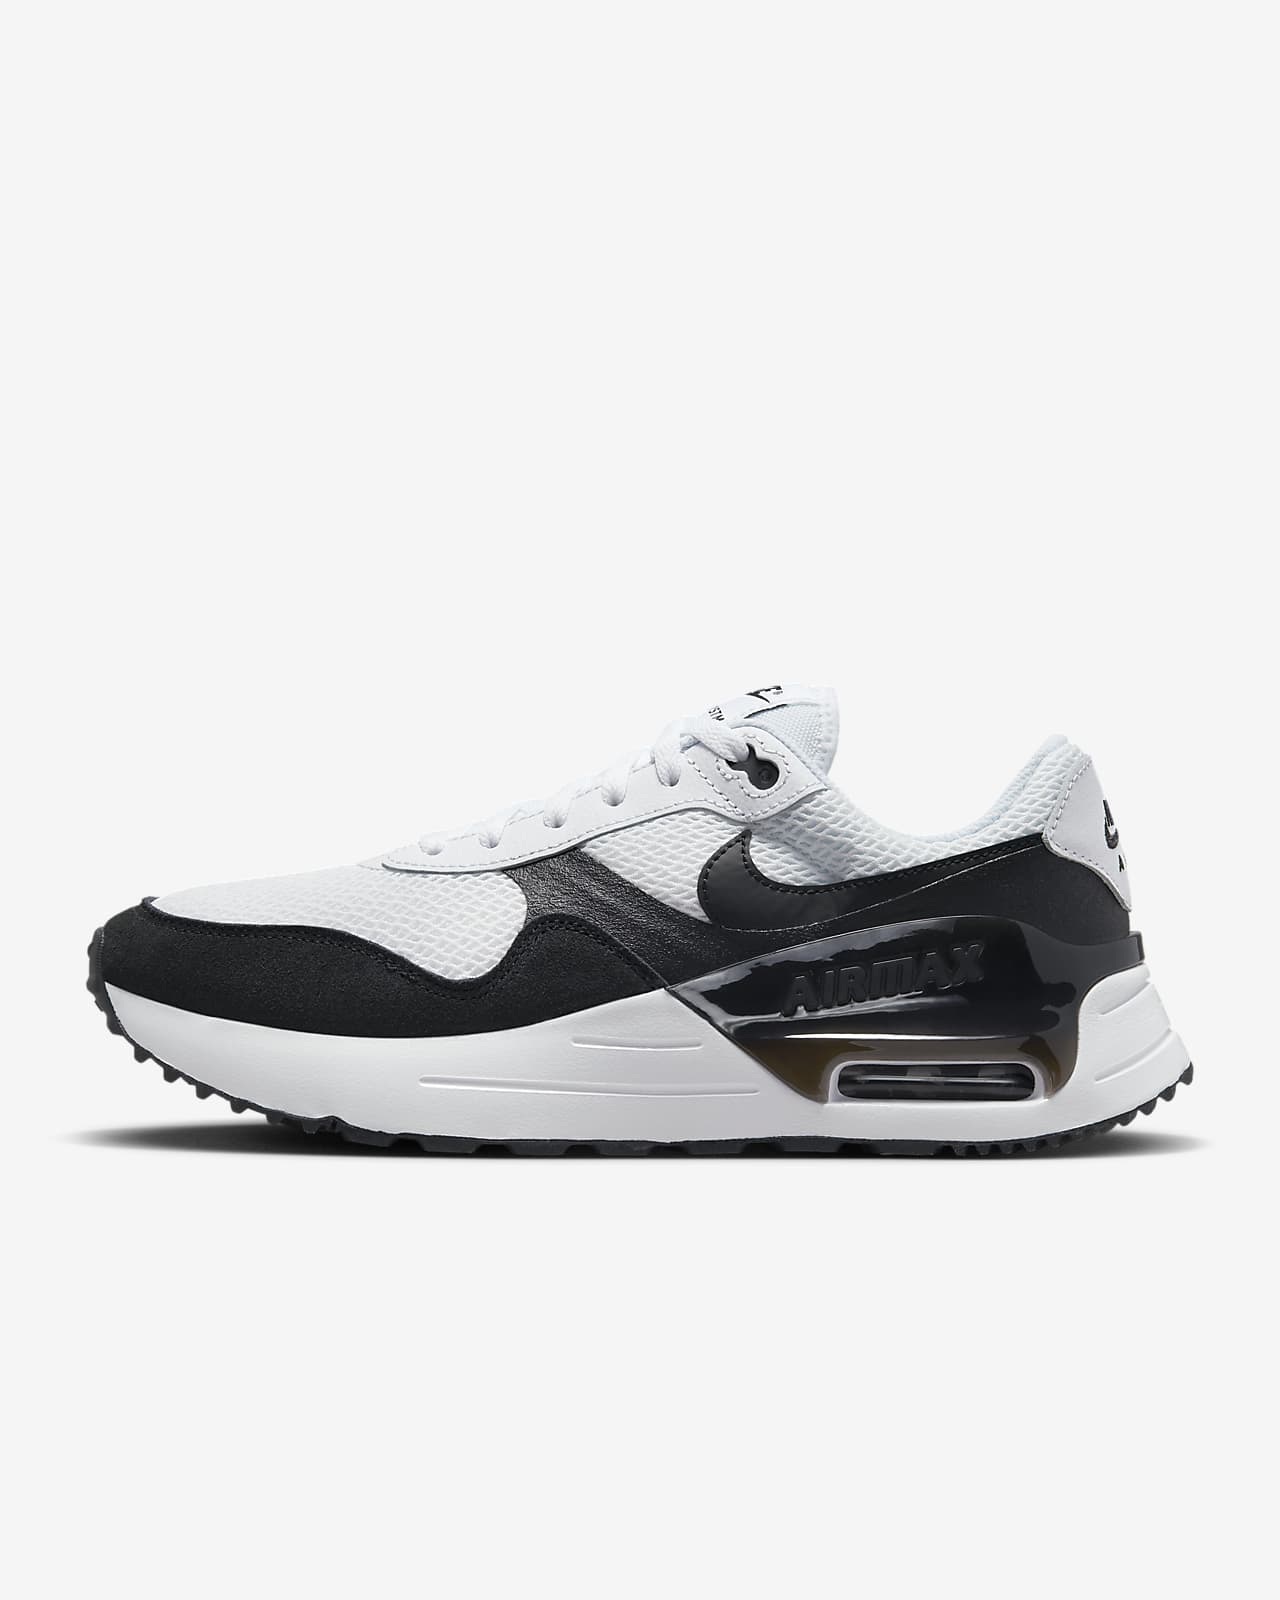 Nike Shoes for Men, Air Max